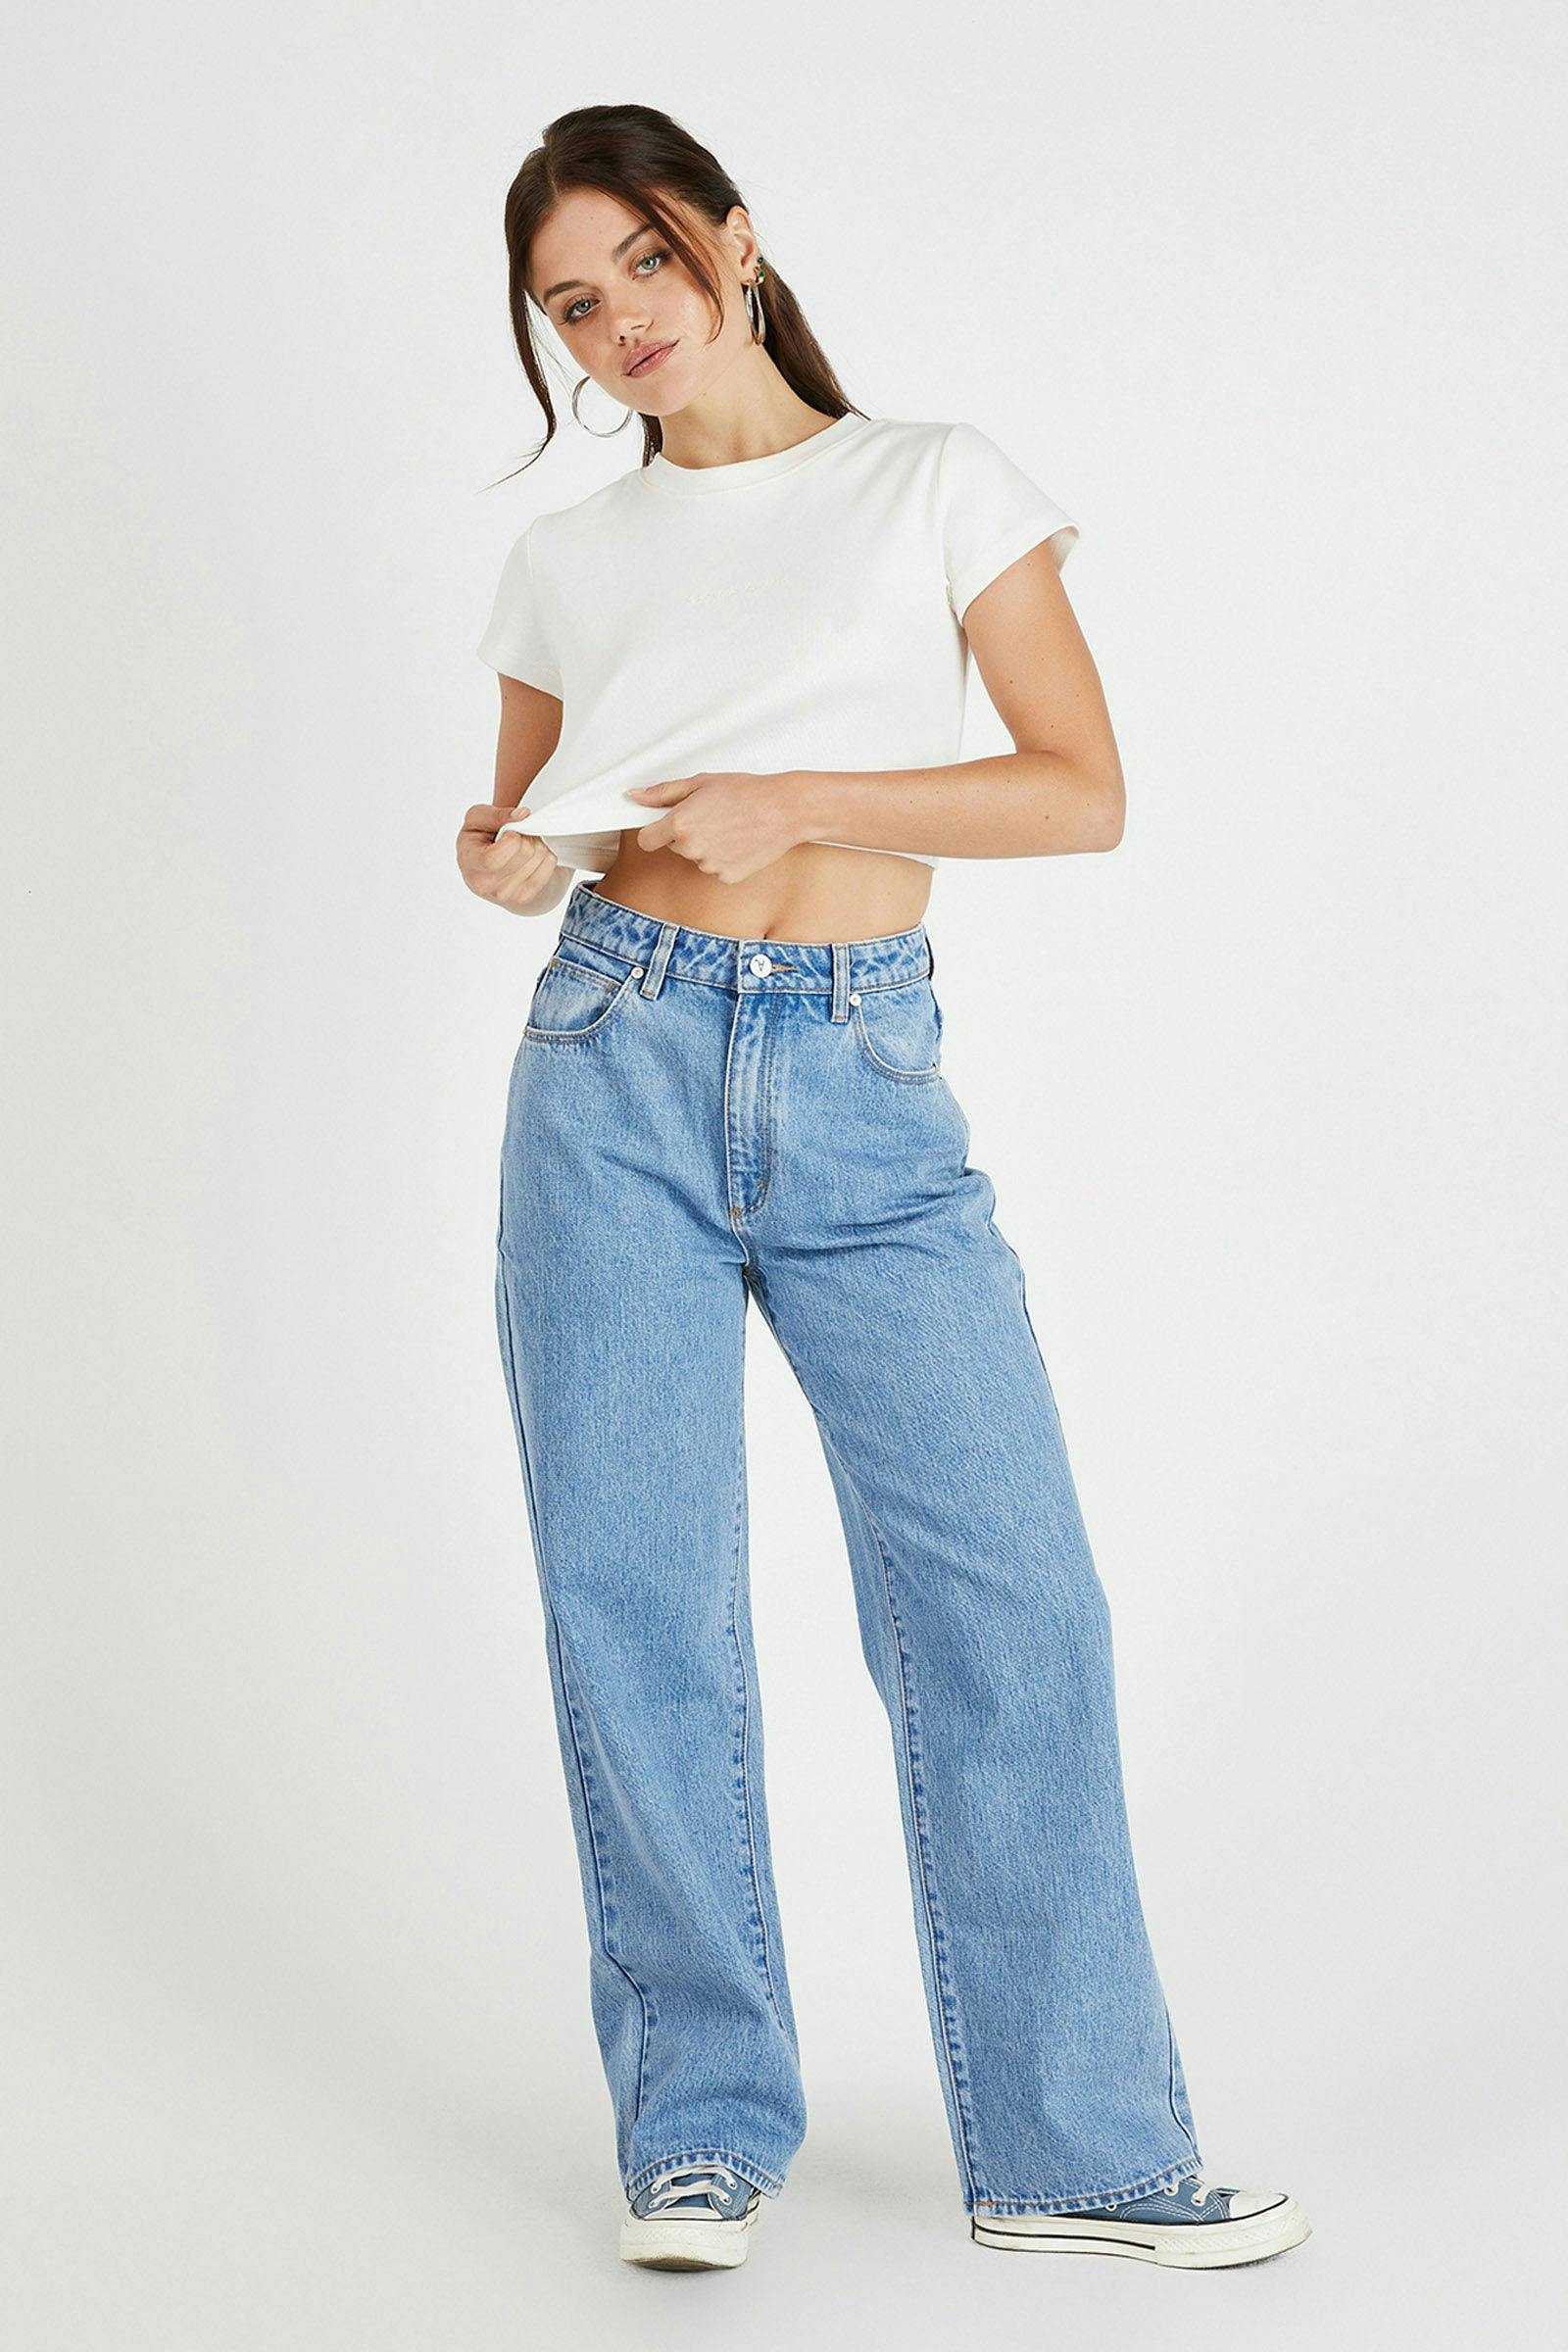 Abrand Jeans | Sale up to 70% Off*